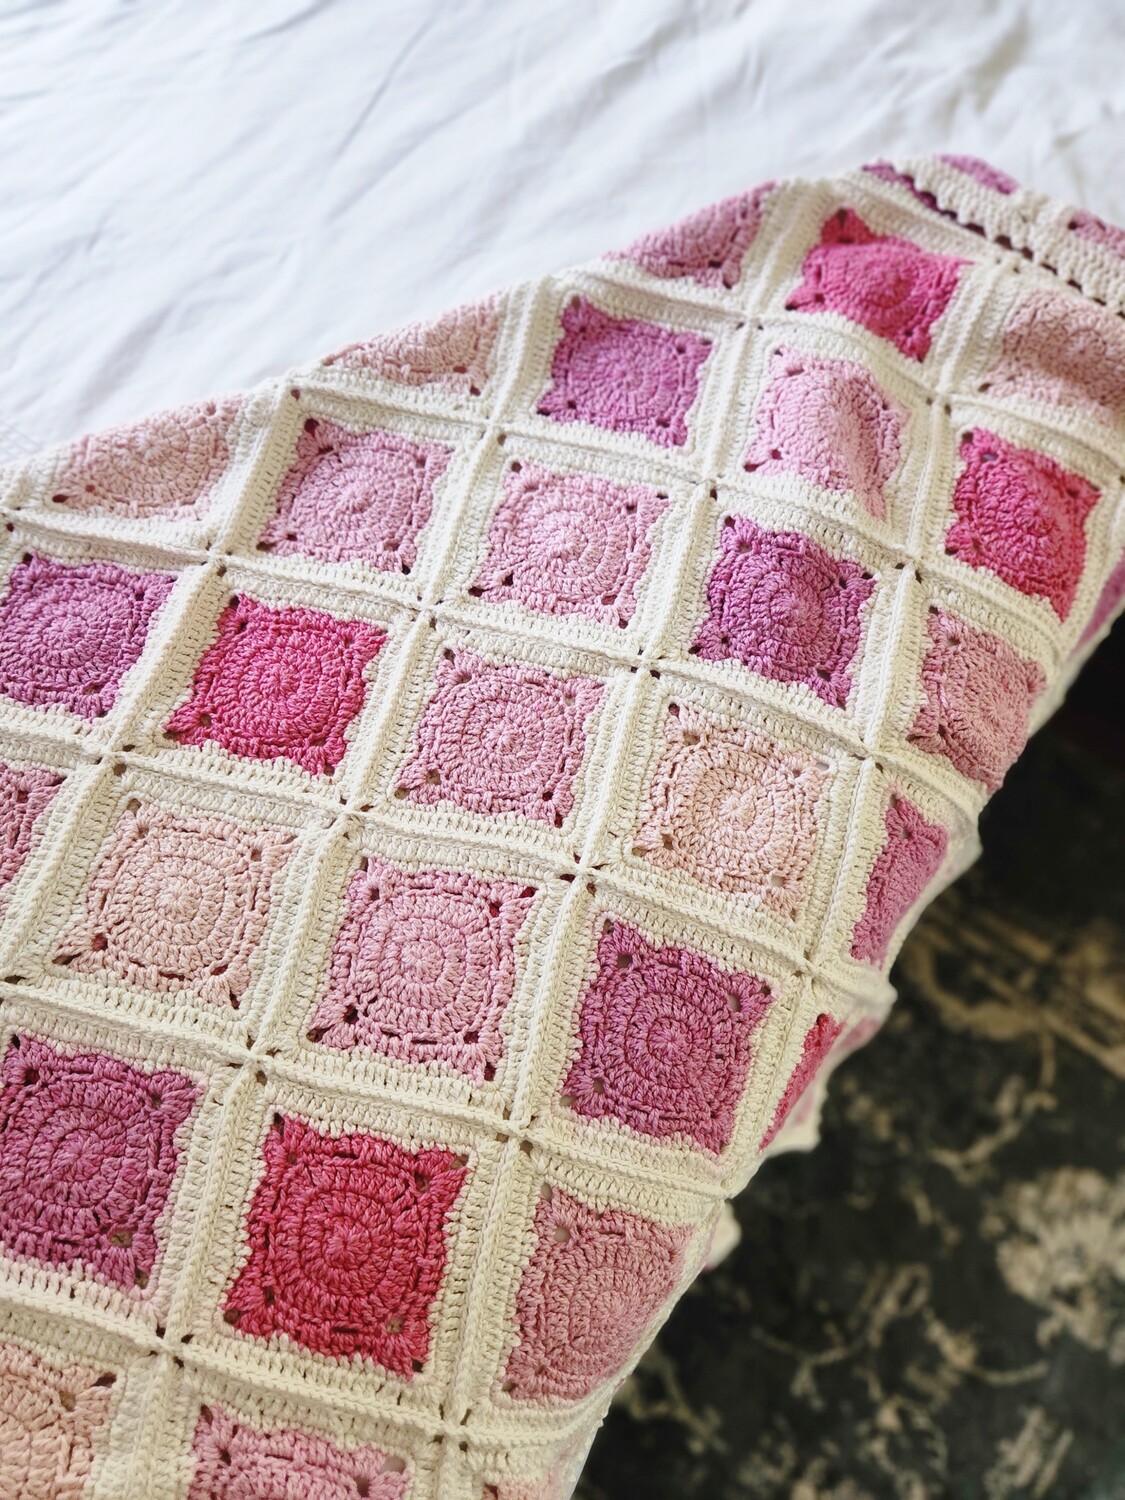 The Hope Blanket - designed by Funky Sheep Design by Gina Shepherd, exclusively for 
Crochet for Cancer